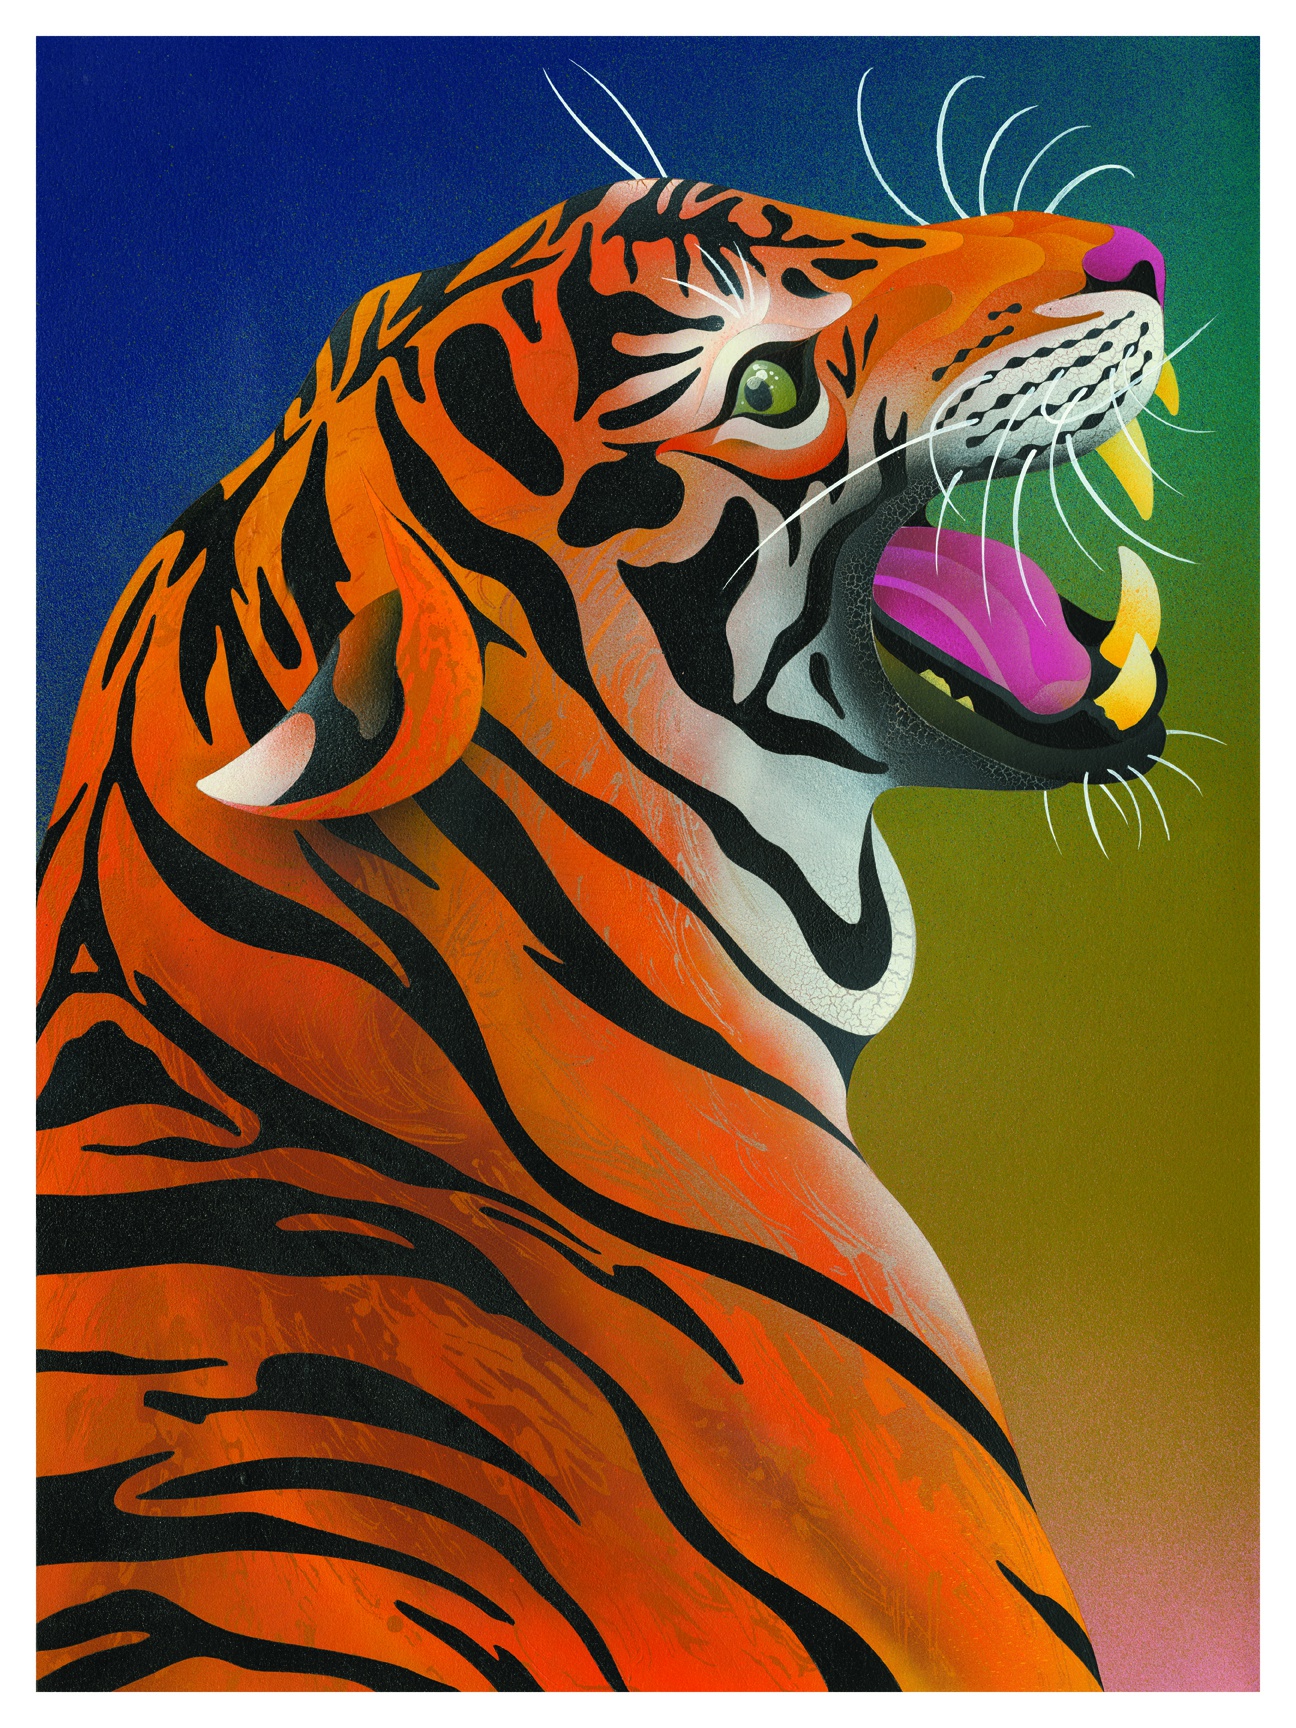 Print by Casey Gray featuring an illustration of a tiger.